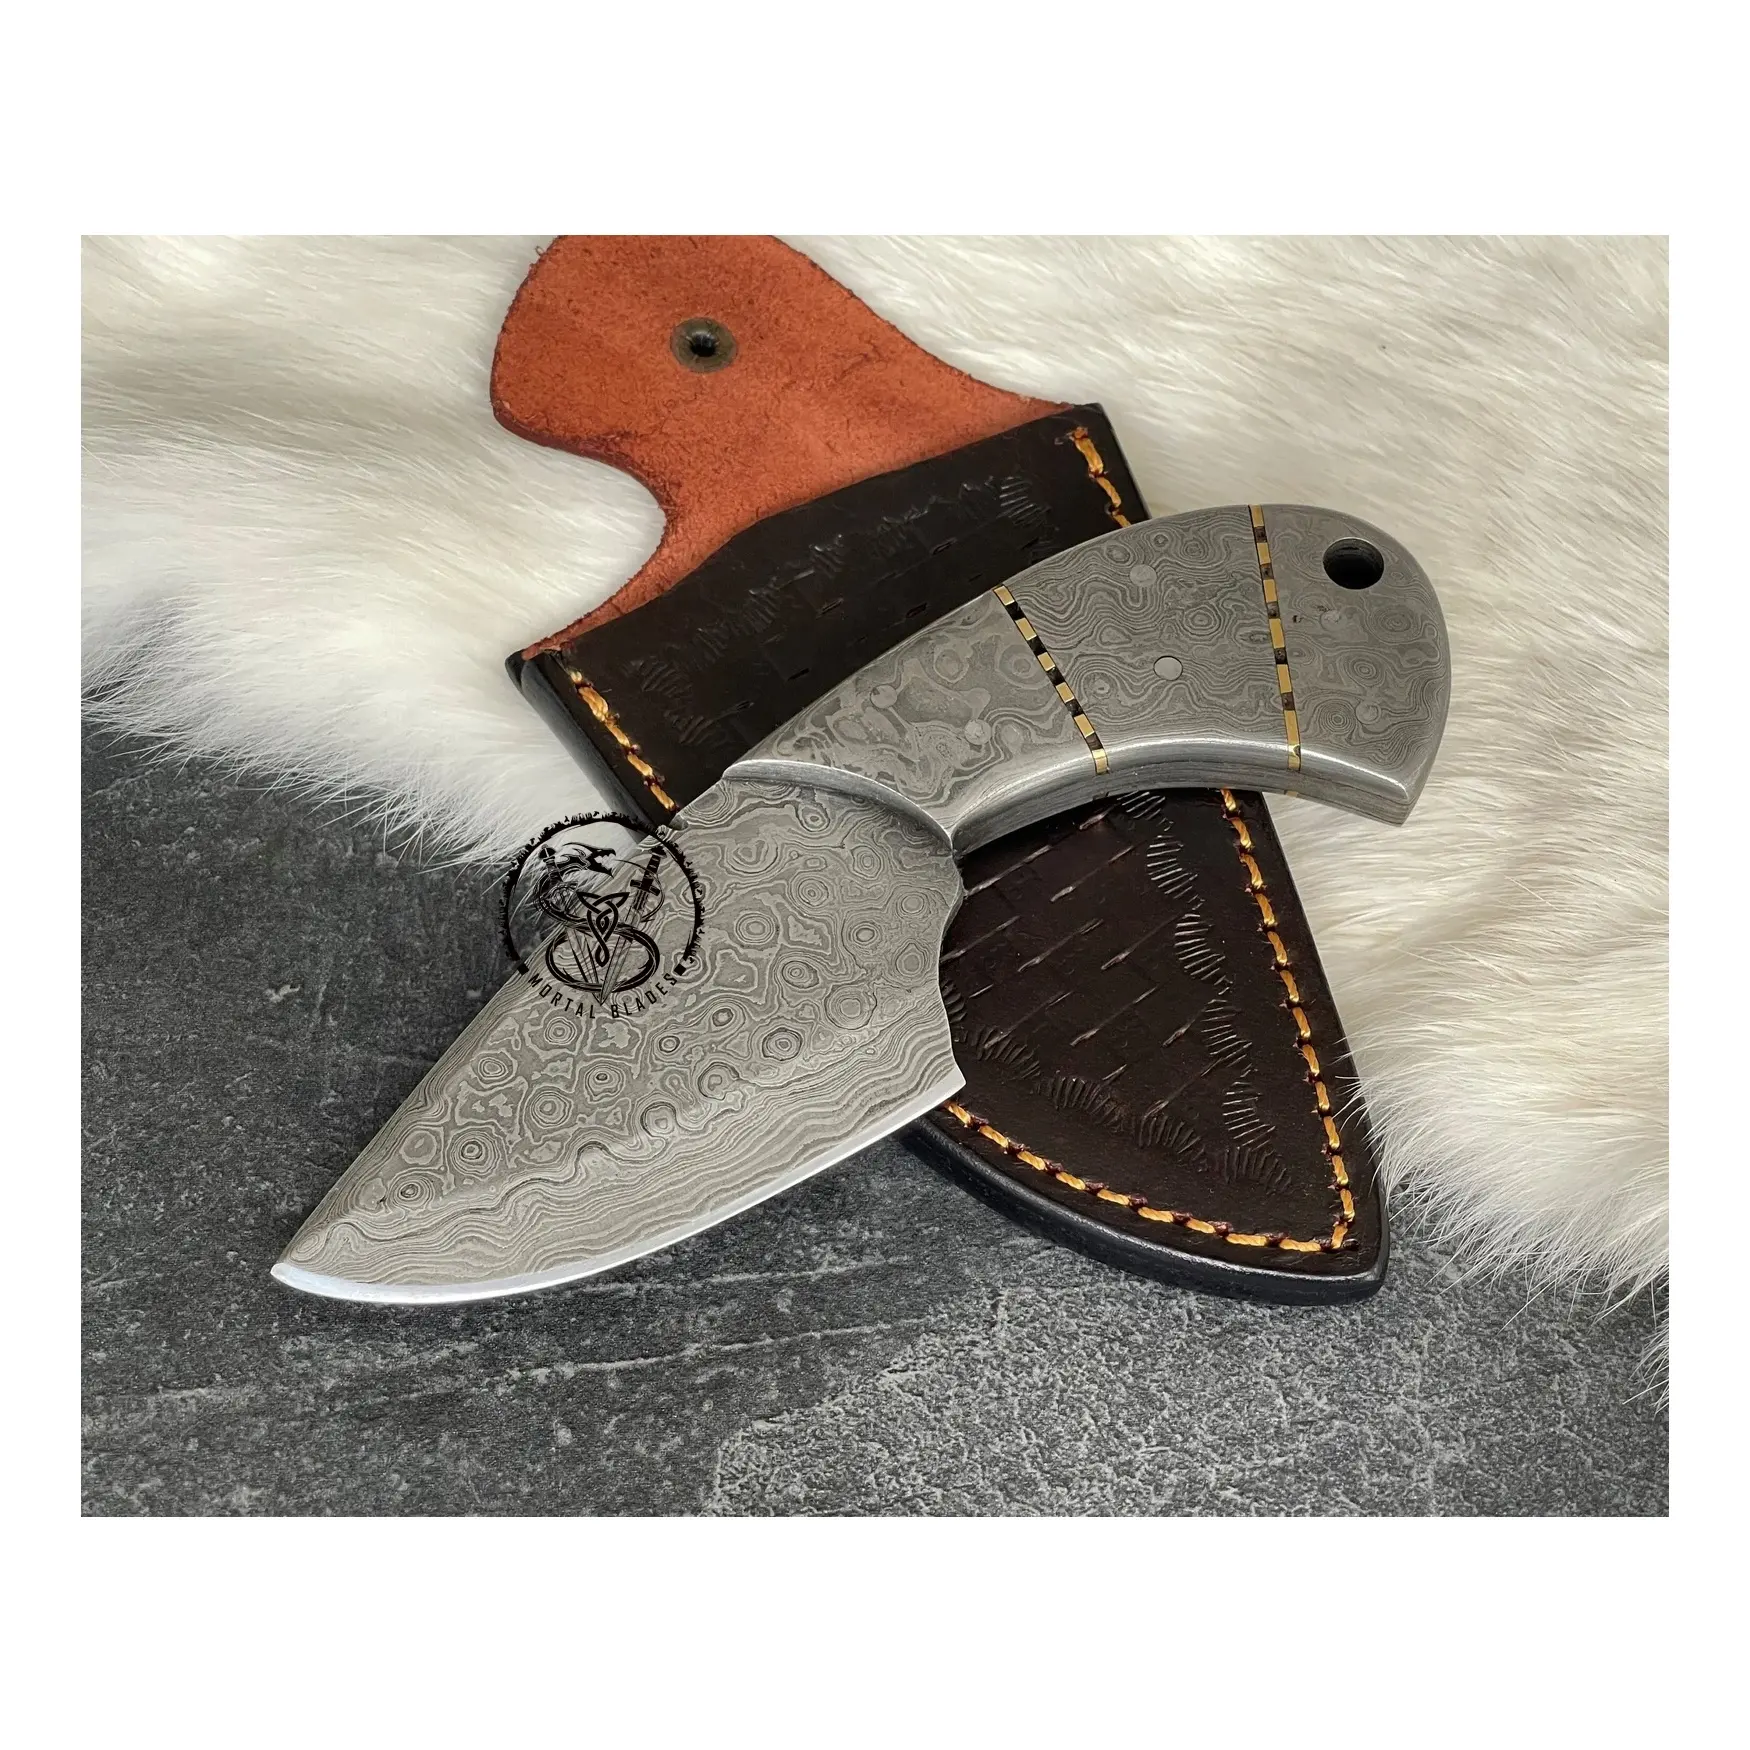 Full Tang Hunting Knife With Damascus Steel Blade Non Slip Damascus Handle Lanyard Hole Fixed Blade Camping Knife With Sheath